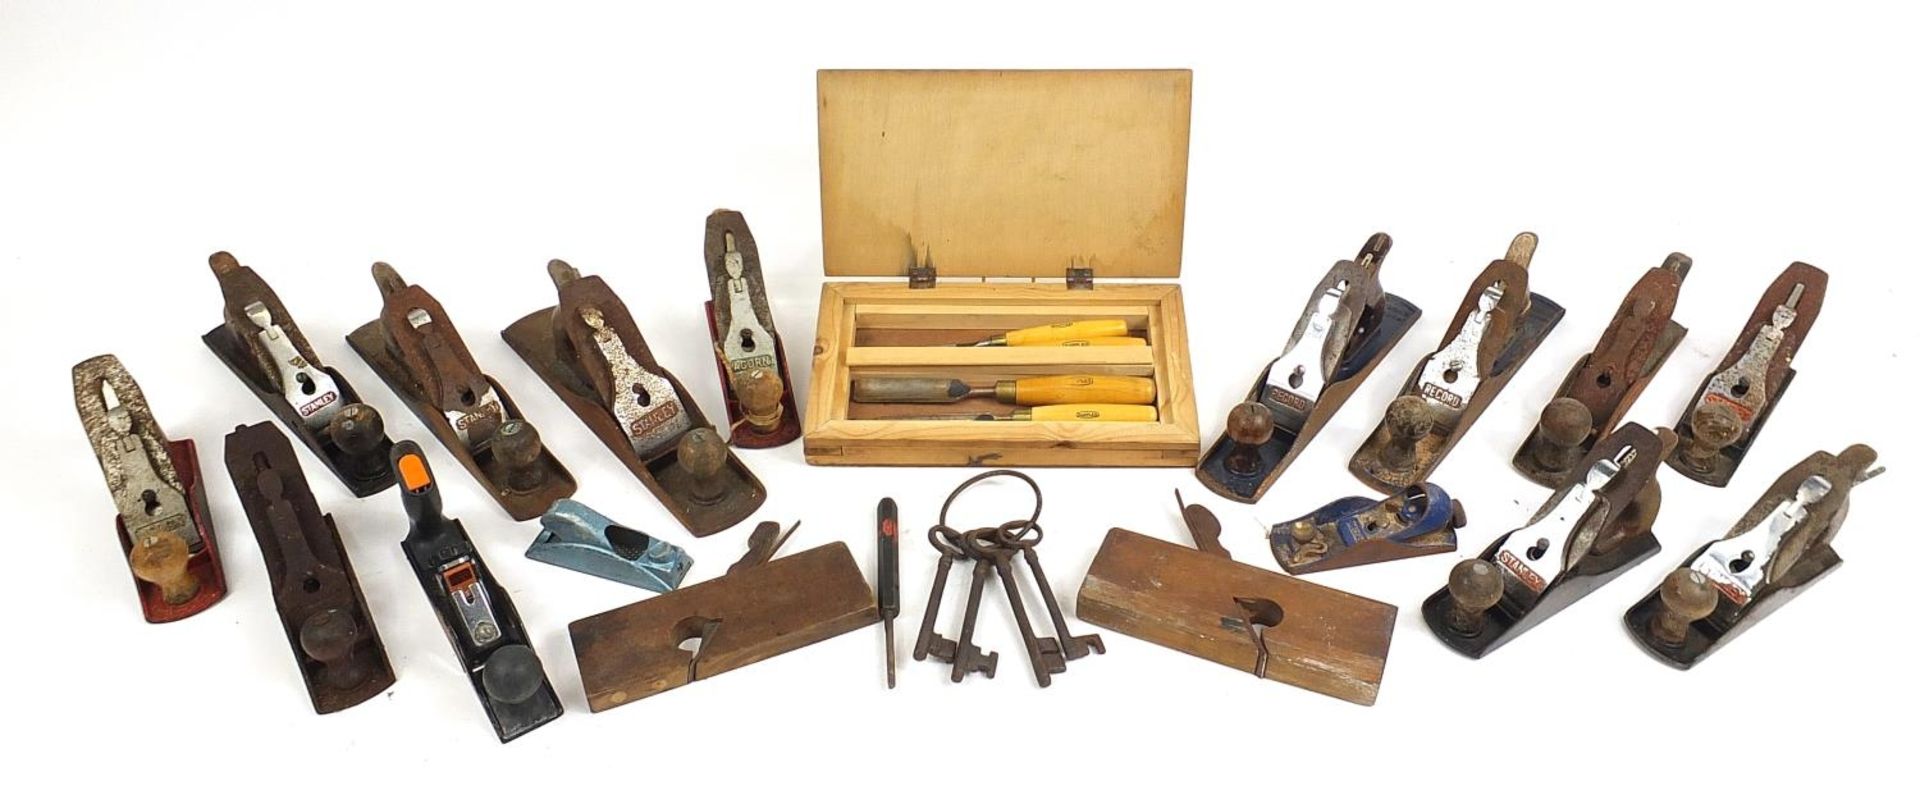 Large selection of vintage woodworking planes and four Marples chisels including Record No 05,